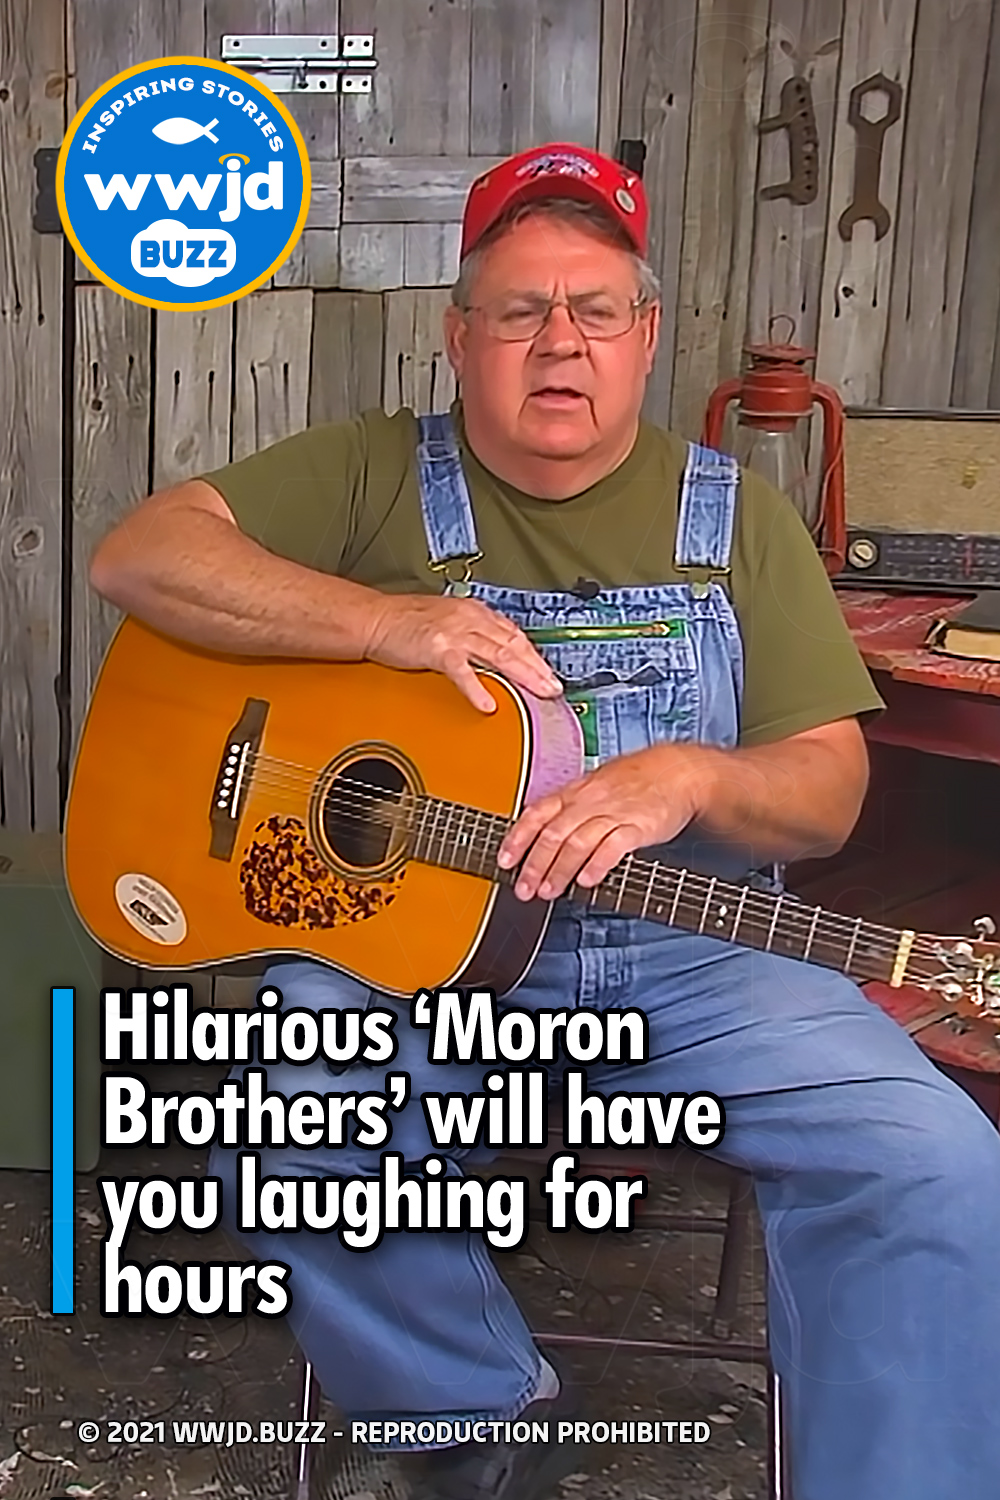 Hilarious ‘Moron Brothers’ will have you laughing for hours